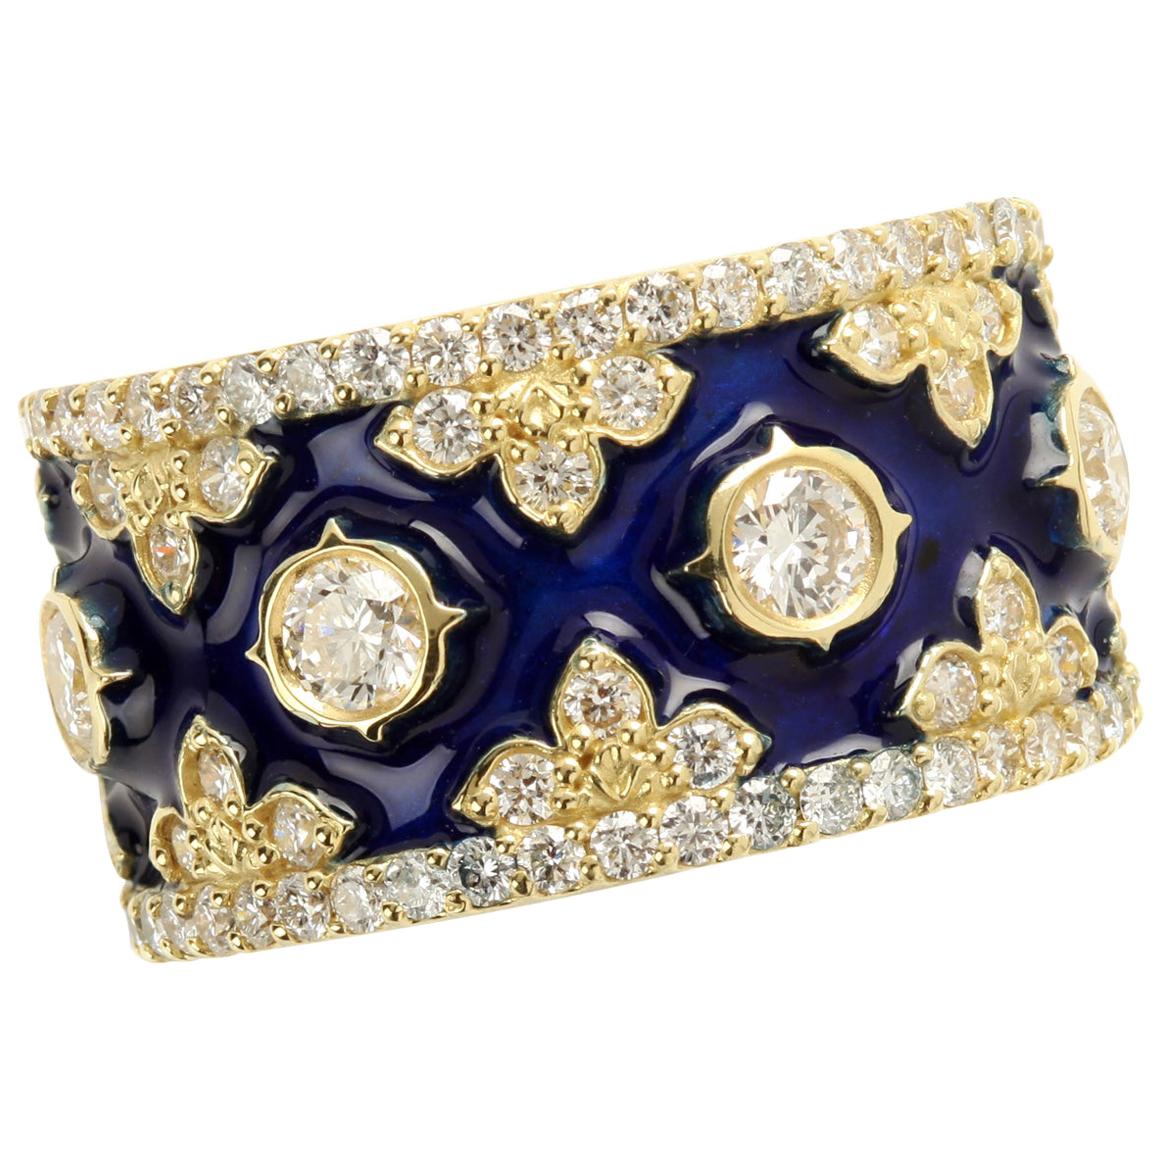 Stambolian Yellow Gold and Diamond Band Ring with Cobalt Blue Enamel